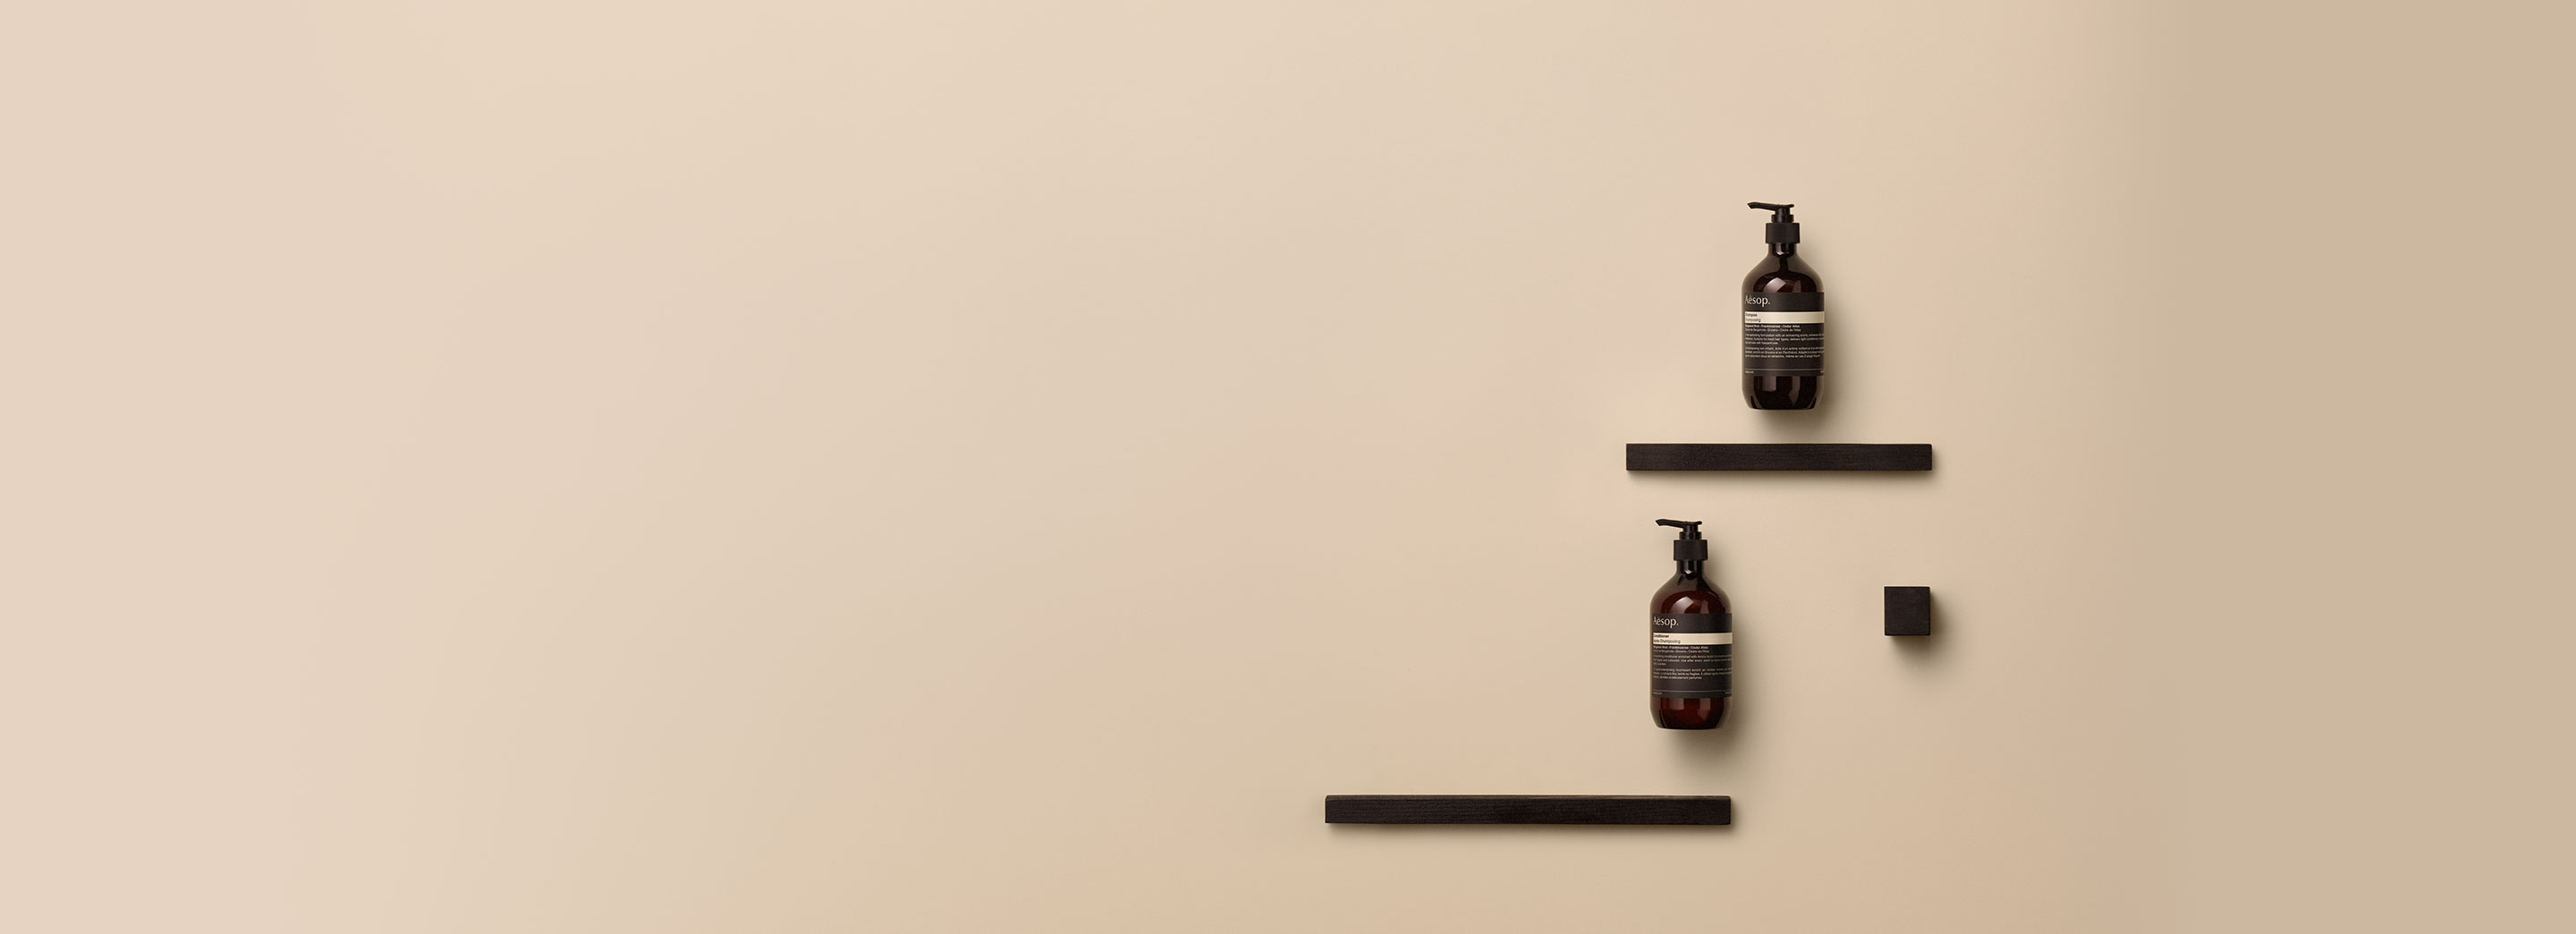 Amber bottles of Aesop Shampoo and Conditioner sitting on a cream background surrounded by geometric shape.